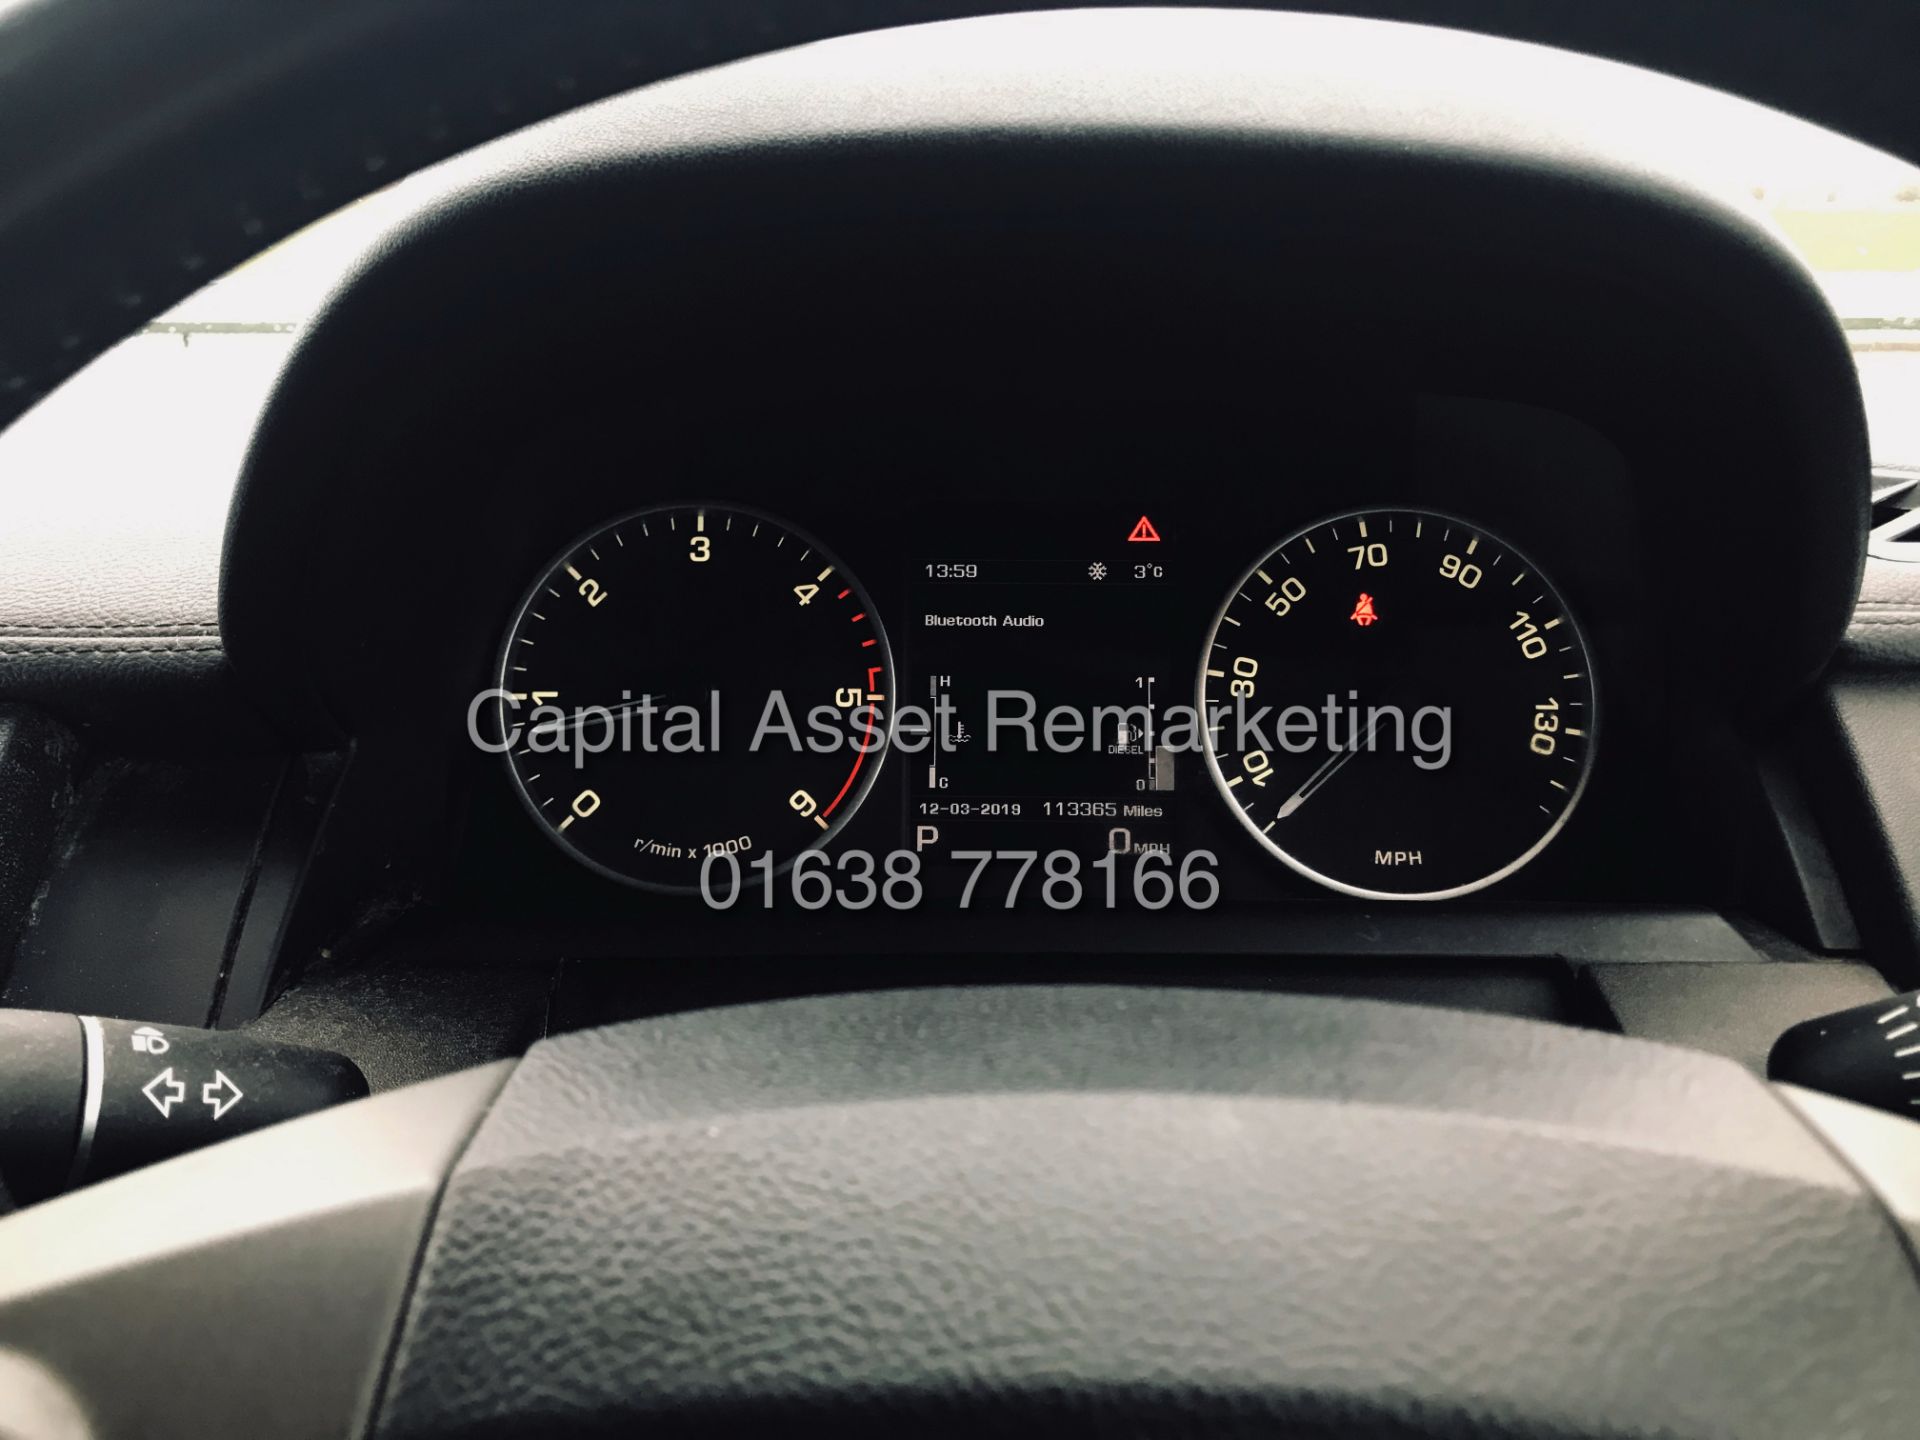 LANDROVER DISCOVERY 4 "SE" AUTO 3.0SDV6 - (2016 REG) 1 KEEPER - SAT NAV - LEATHER - HUGE SPEC -WOW! - Image 19 of 20